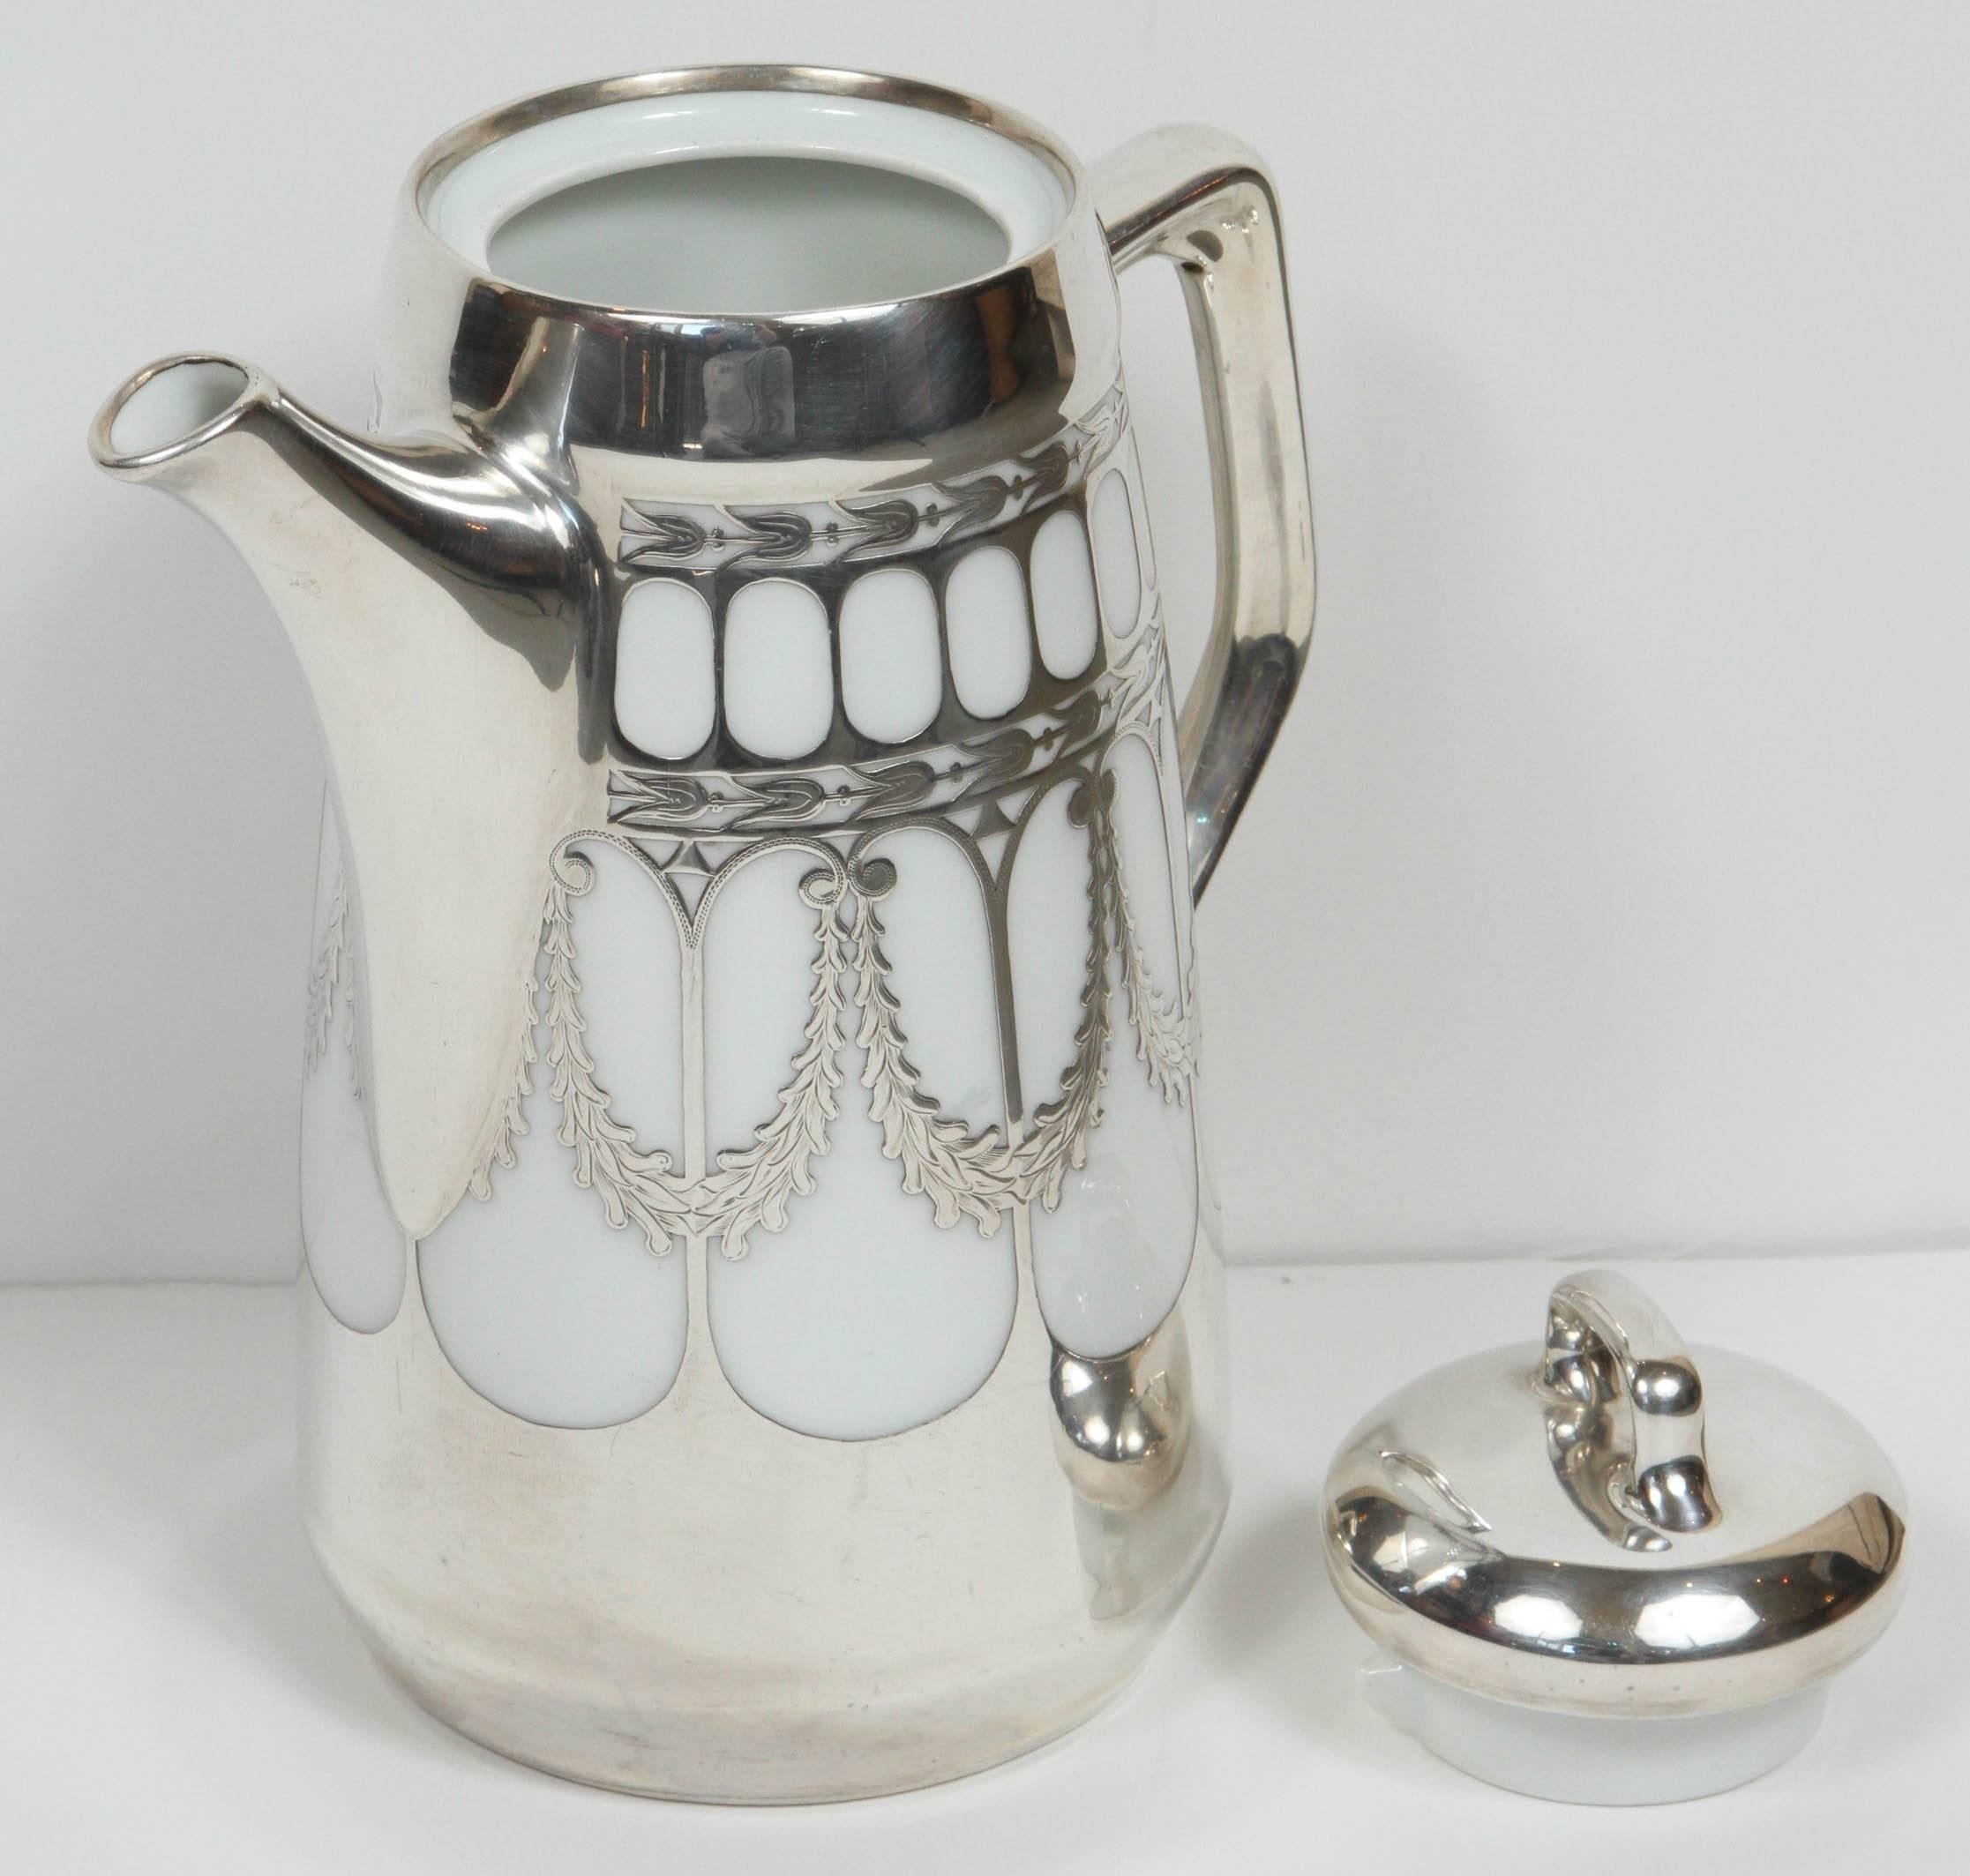 Vintage Porcelain and Sterling Silver Coffee Pot 2